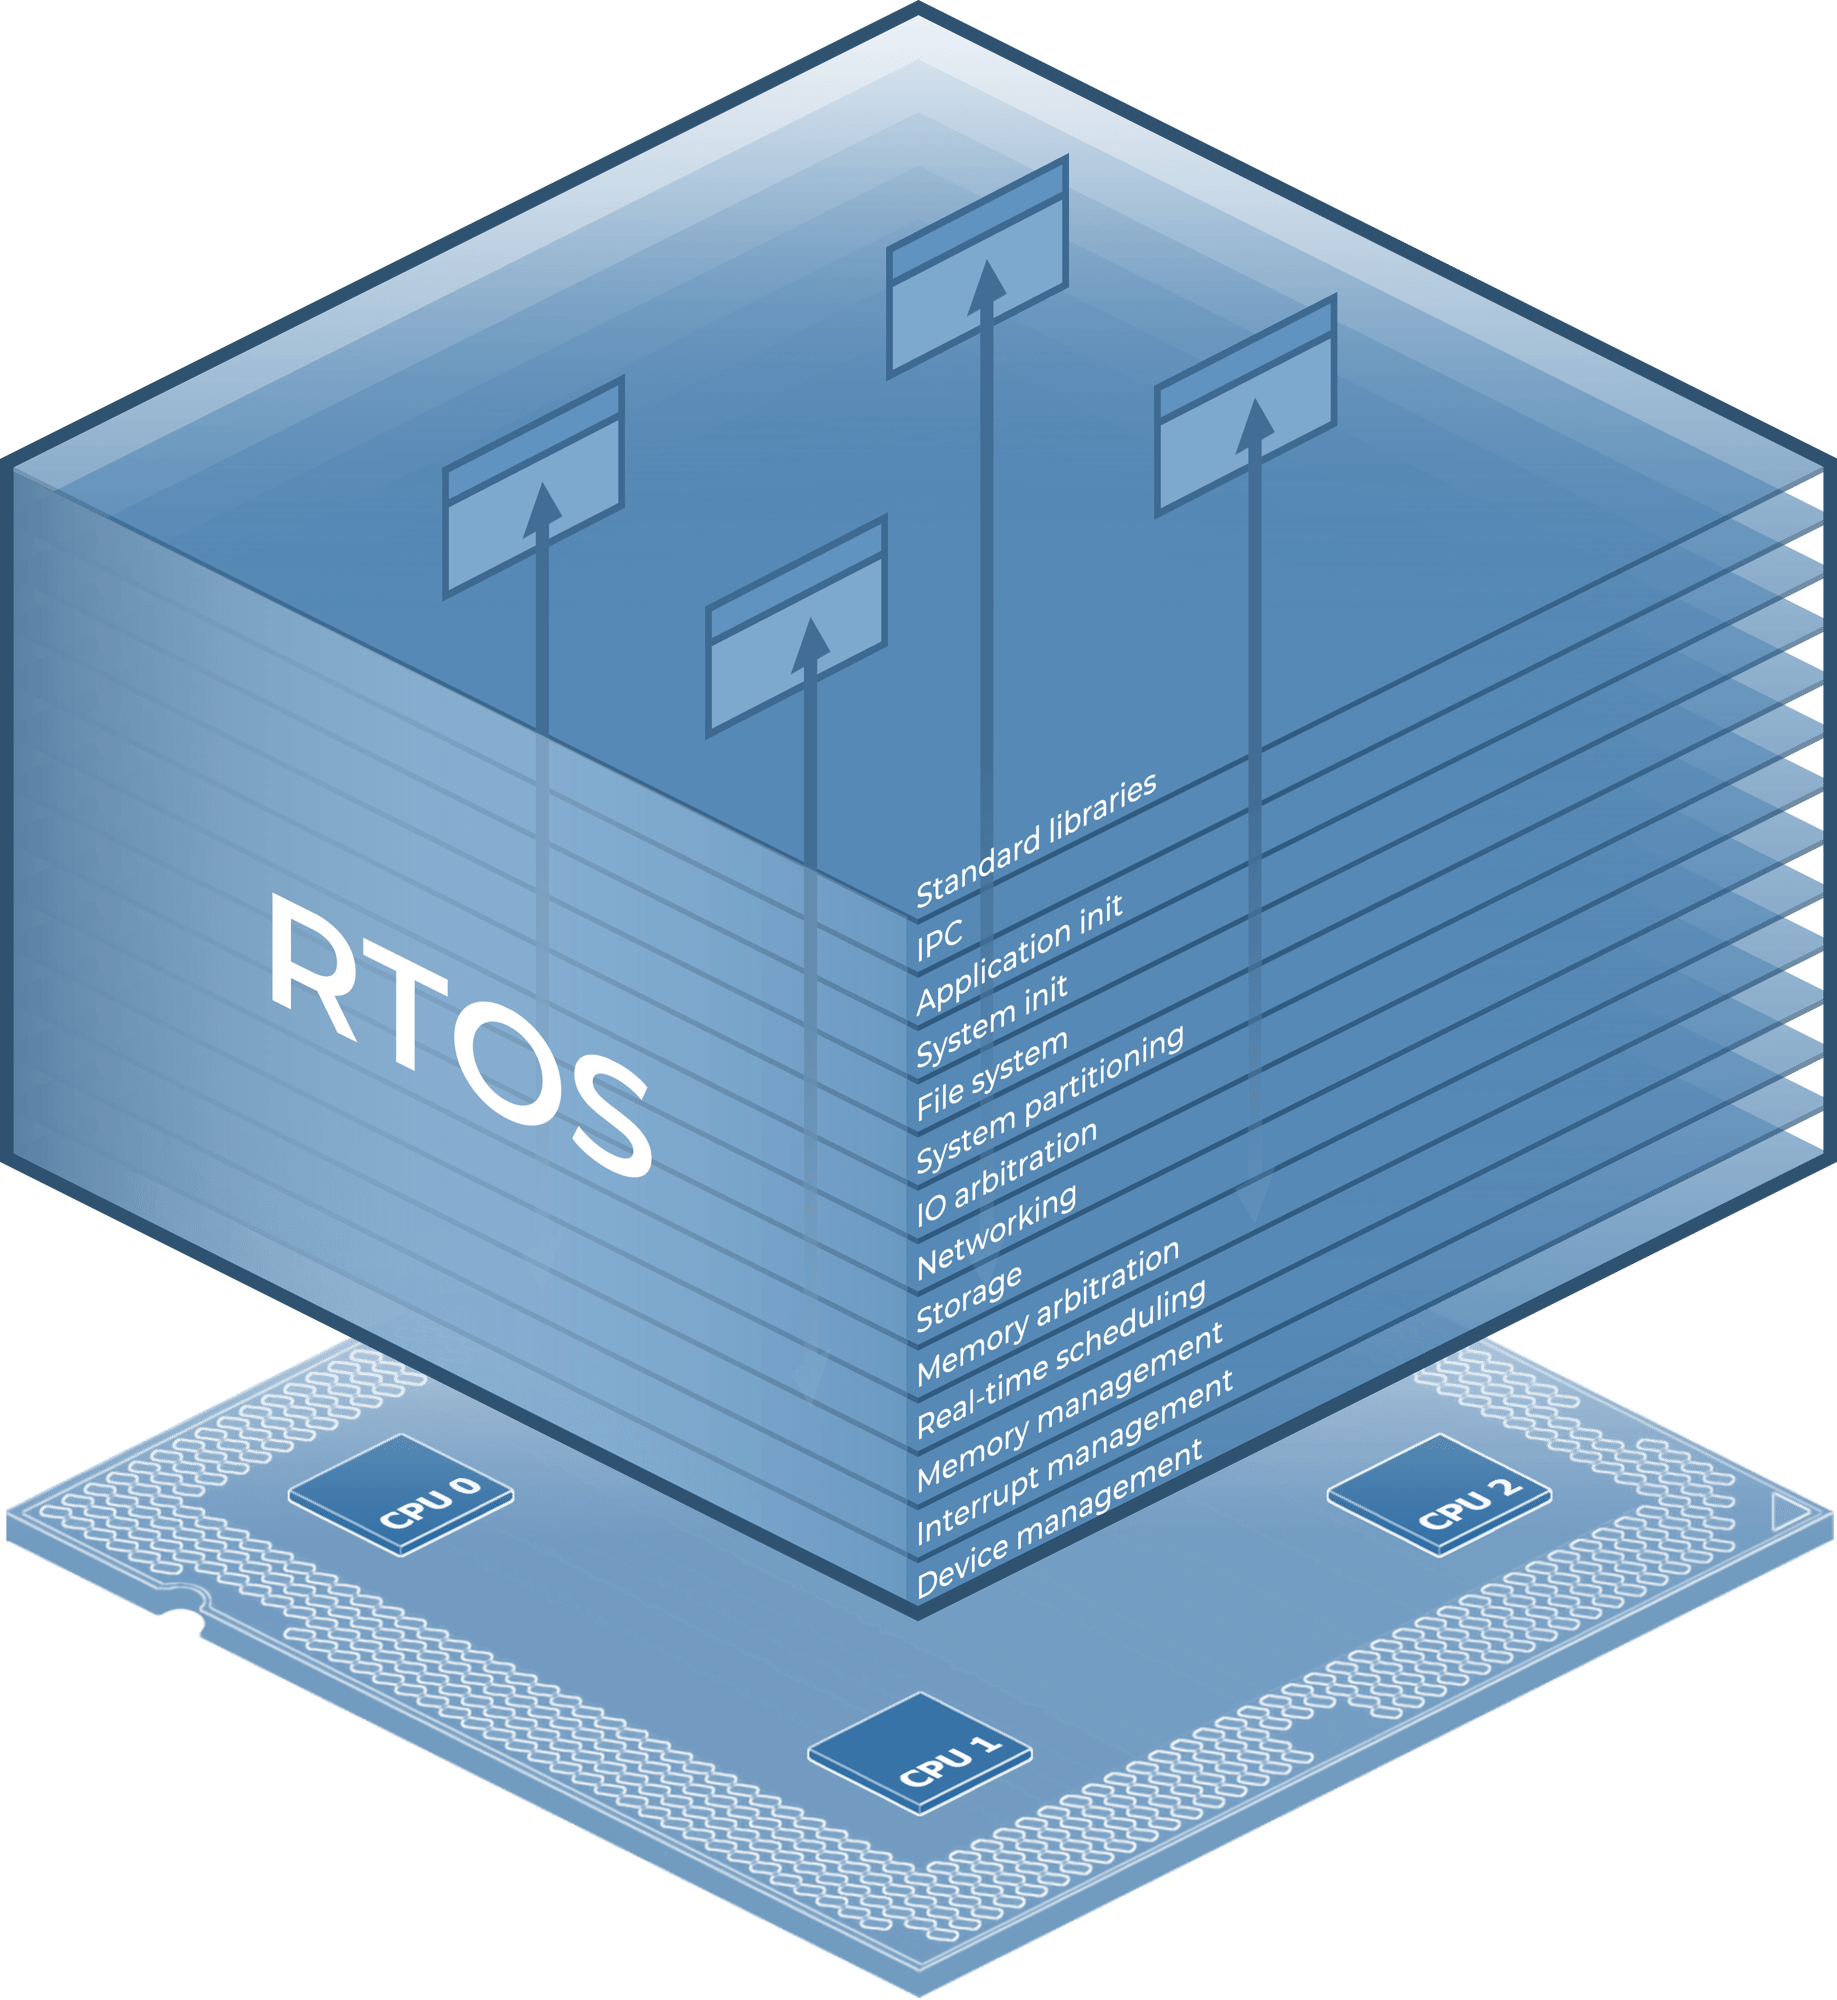 Traditional real-time operating system (RTOS) stack 